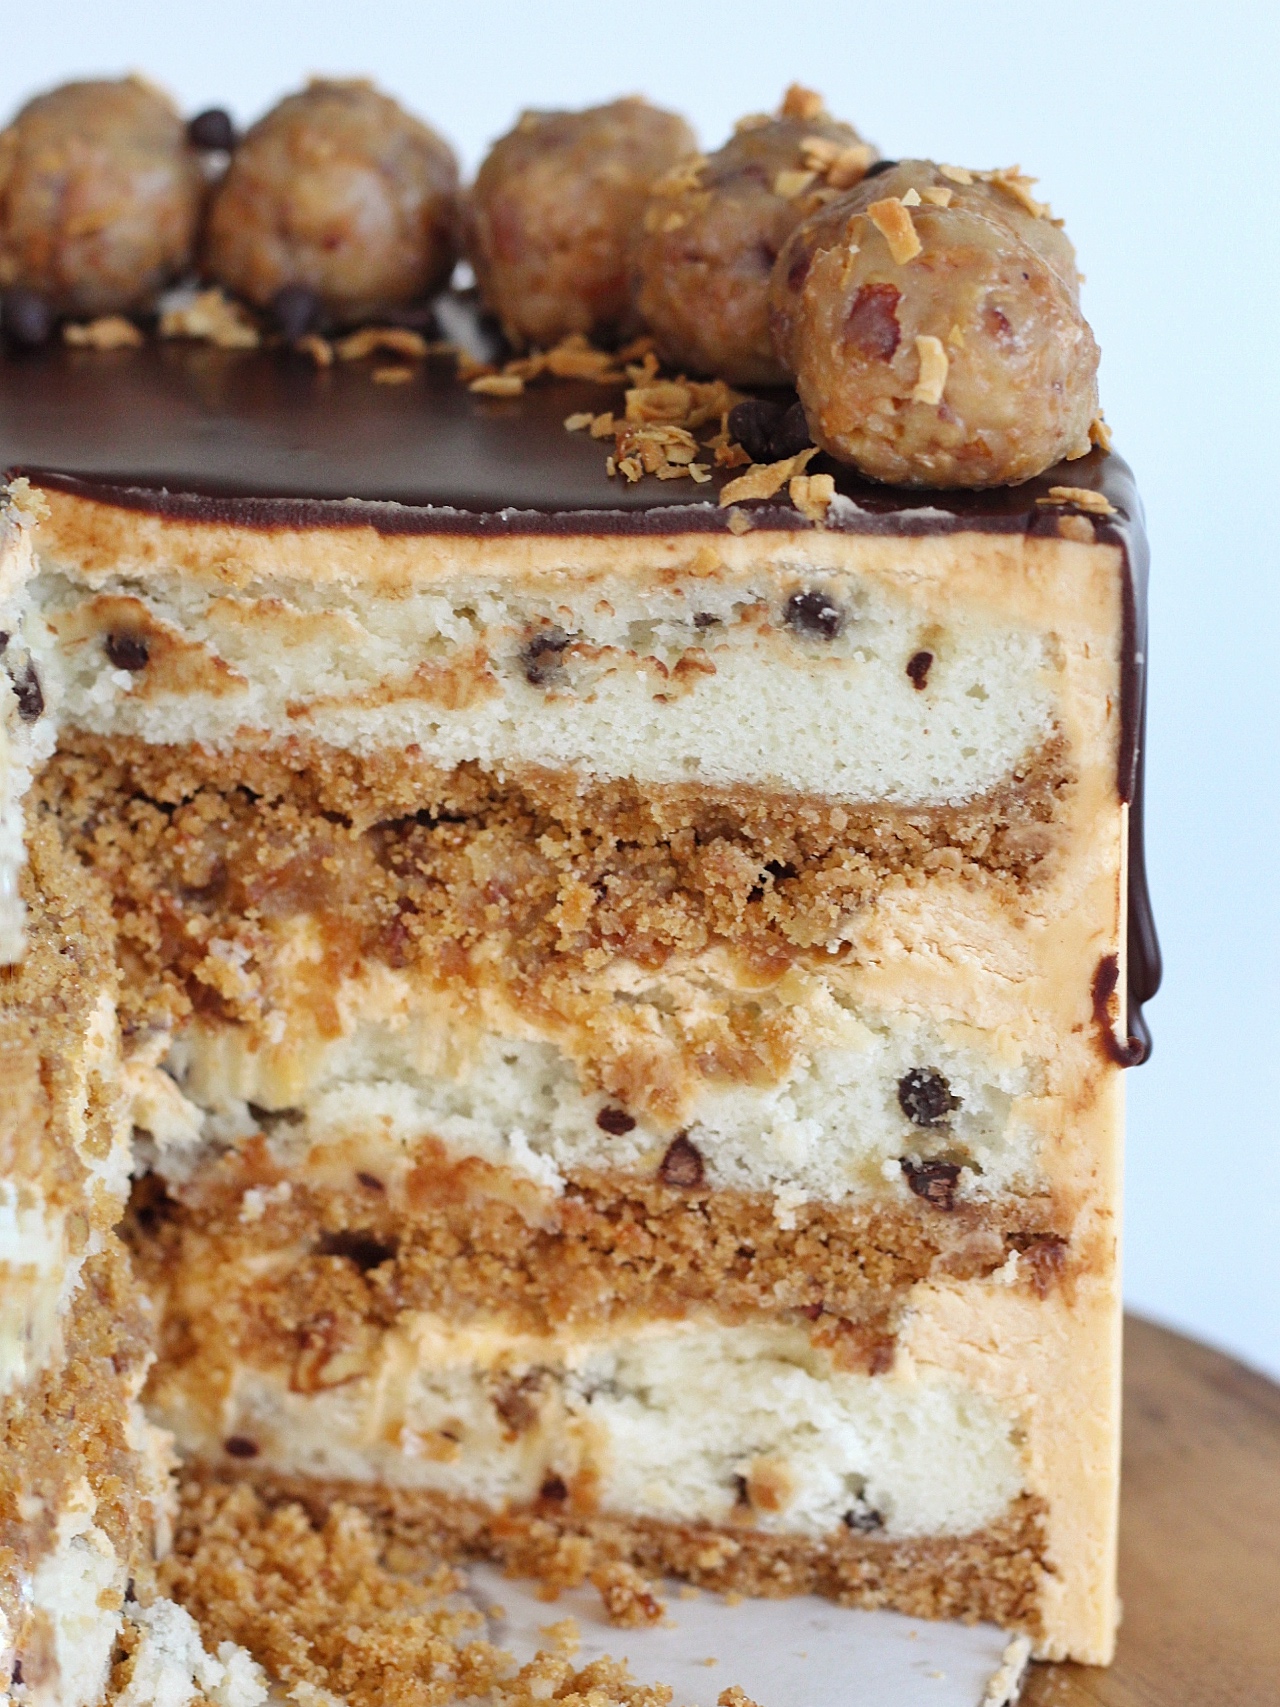 Seven Layer Bar Cake: inspired by a 7 layer bar, this Seven Layer Bar Cake is made up of graham cracker crust, coconut chocolate chip cake layers, a buttery, gooey coconut and pecan filling and a butterscotch buttercream. #sevenlayerbar #7layerbar #magicbars #sevenlayerbarcake #7layerbarcake #cake #layeredcake #birthdaycake #cakebycourtney